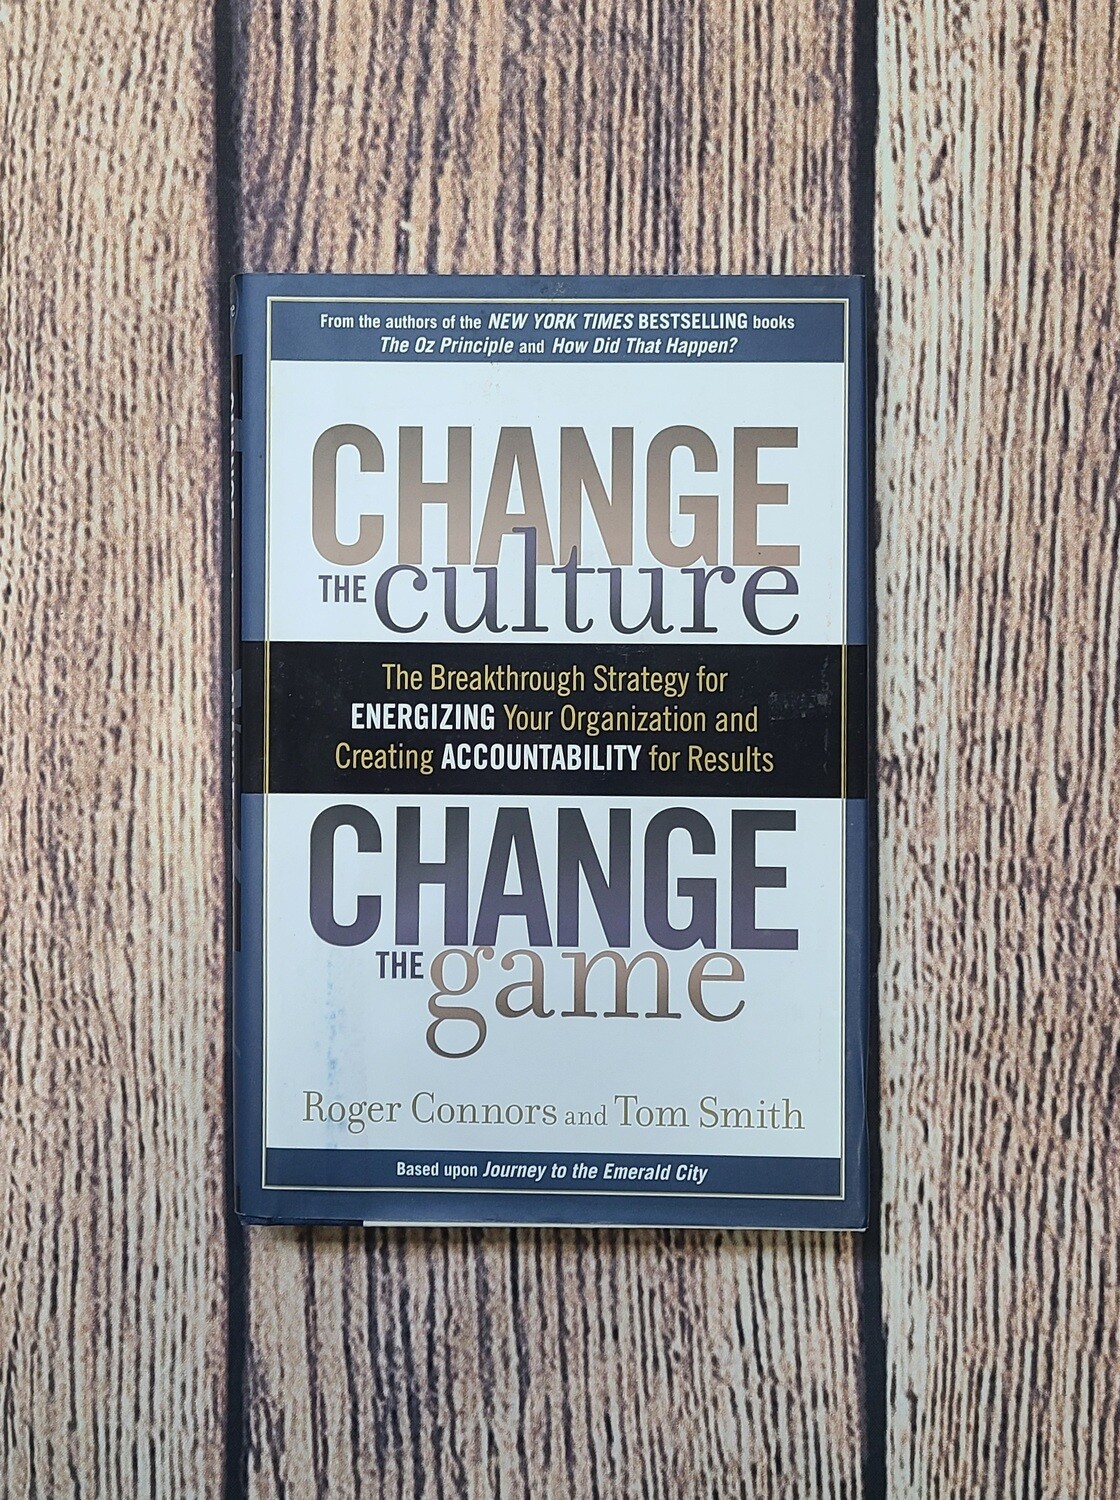 Change the Culture: Change the Game - The Breakthrough Strategy for Energizing Your Organization and Creating Accountability for Results by Roger Connors and Tom Smith